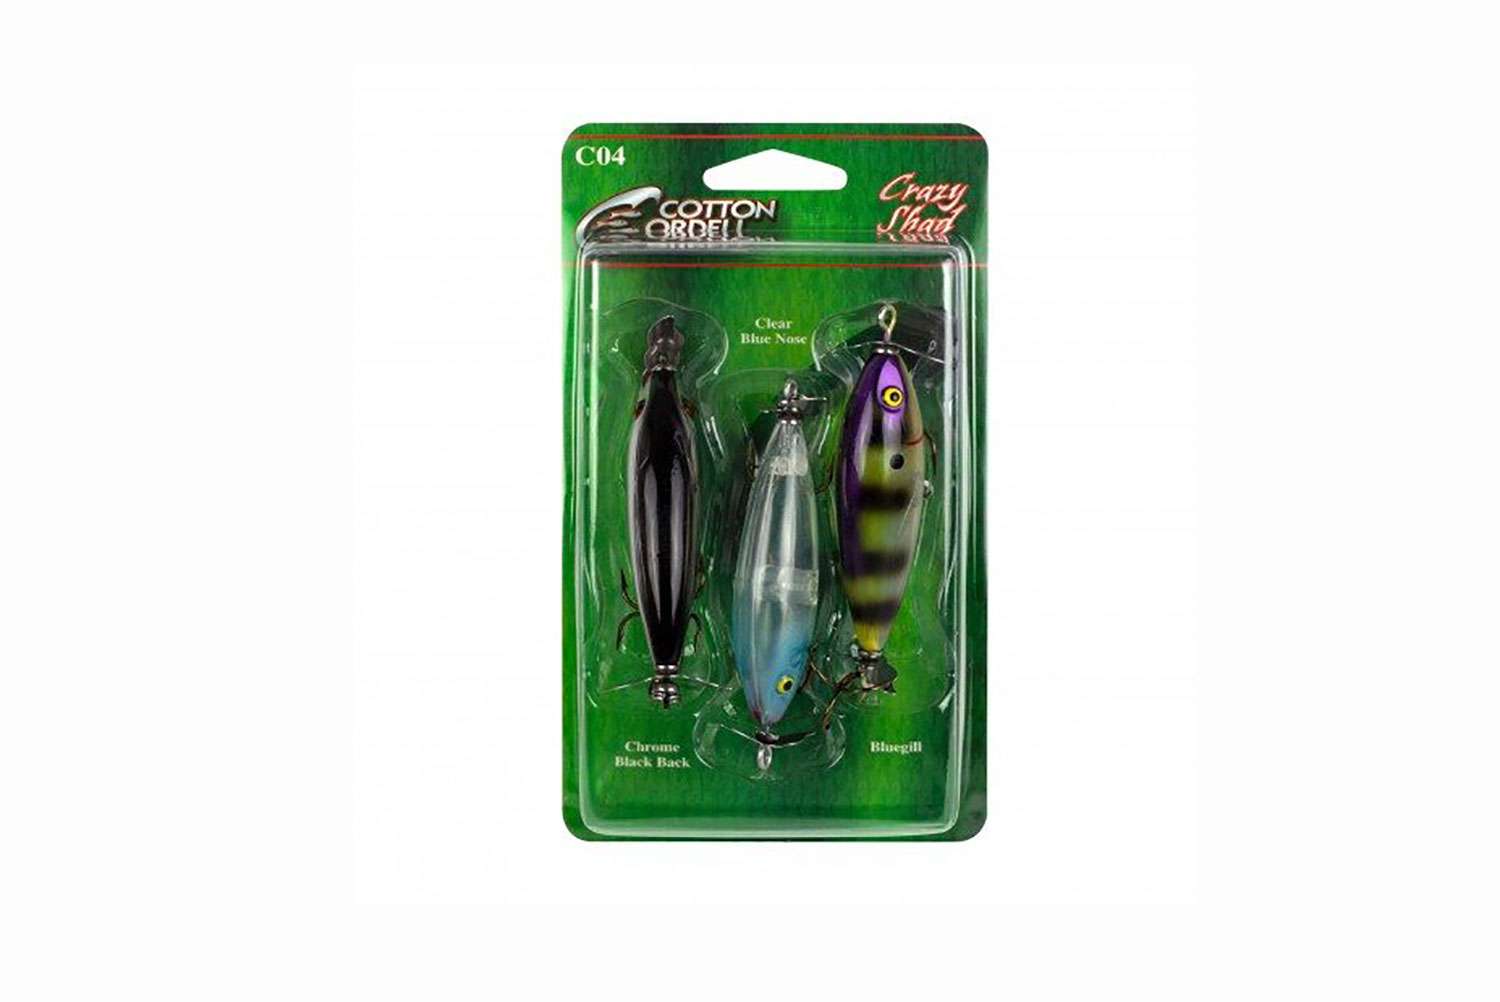 <p><b>Cotton Cordell Crazy Shad Kit</b></p>
The Crazy Shad is a legendary topwater from Cotton Cordell that was recently resurrected due to incredible demand from anglers. This small prop bait boasts a quick darting slide across the surface that drives bass mad, and comes in several patterns exclusive to Cotton Cordell. This kit contains three of the top selling options in the Crazy Shad to ensure anglers have all the options they need for any topwater situation they might encounter.<br>
<p><b>MSRP: $13.49</b></p>
<a href=